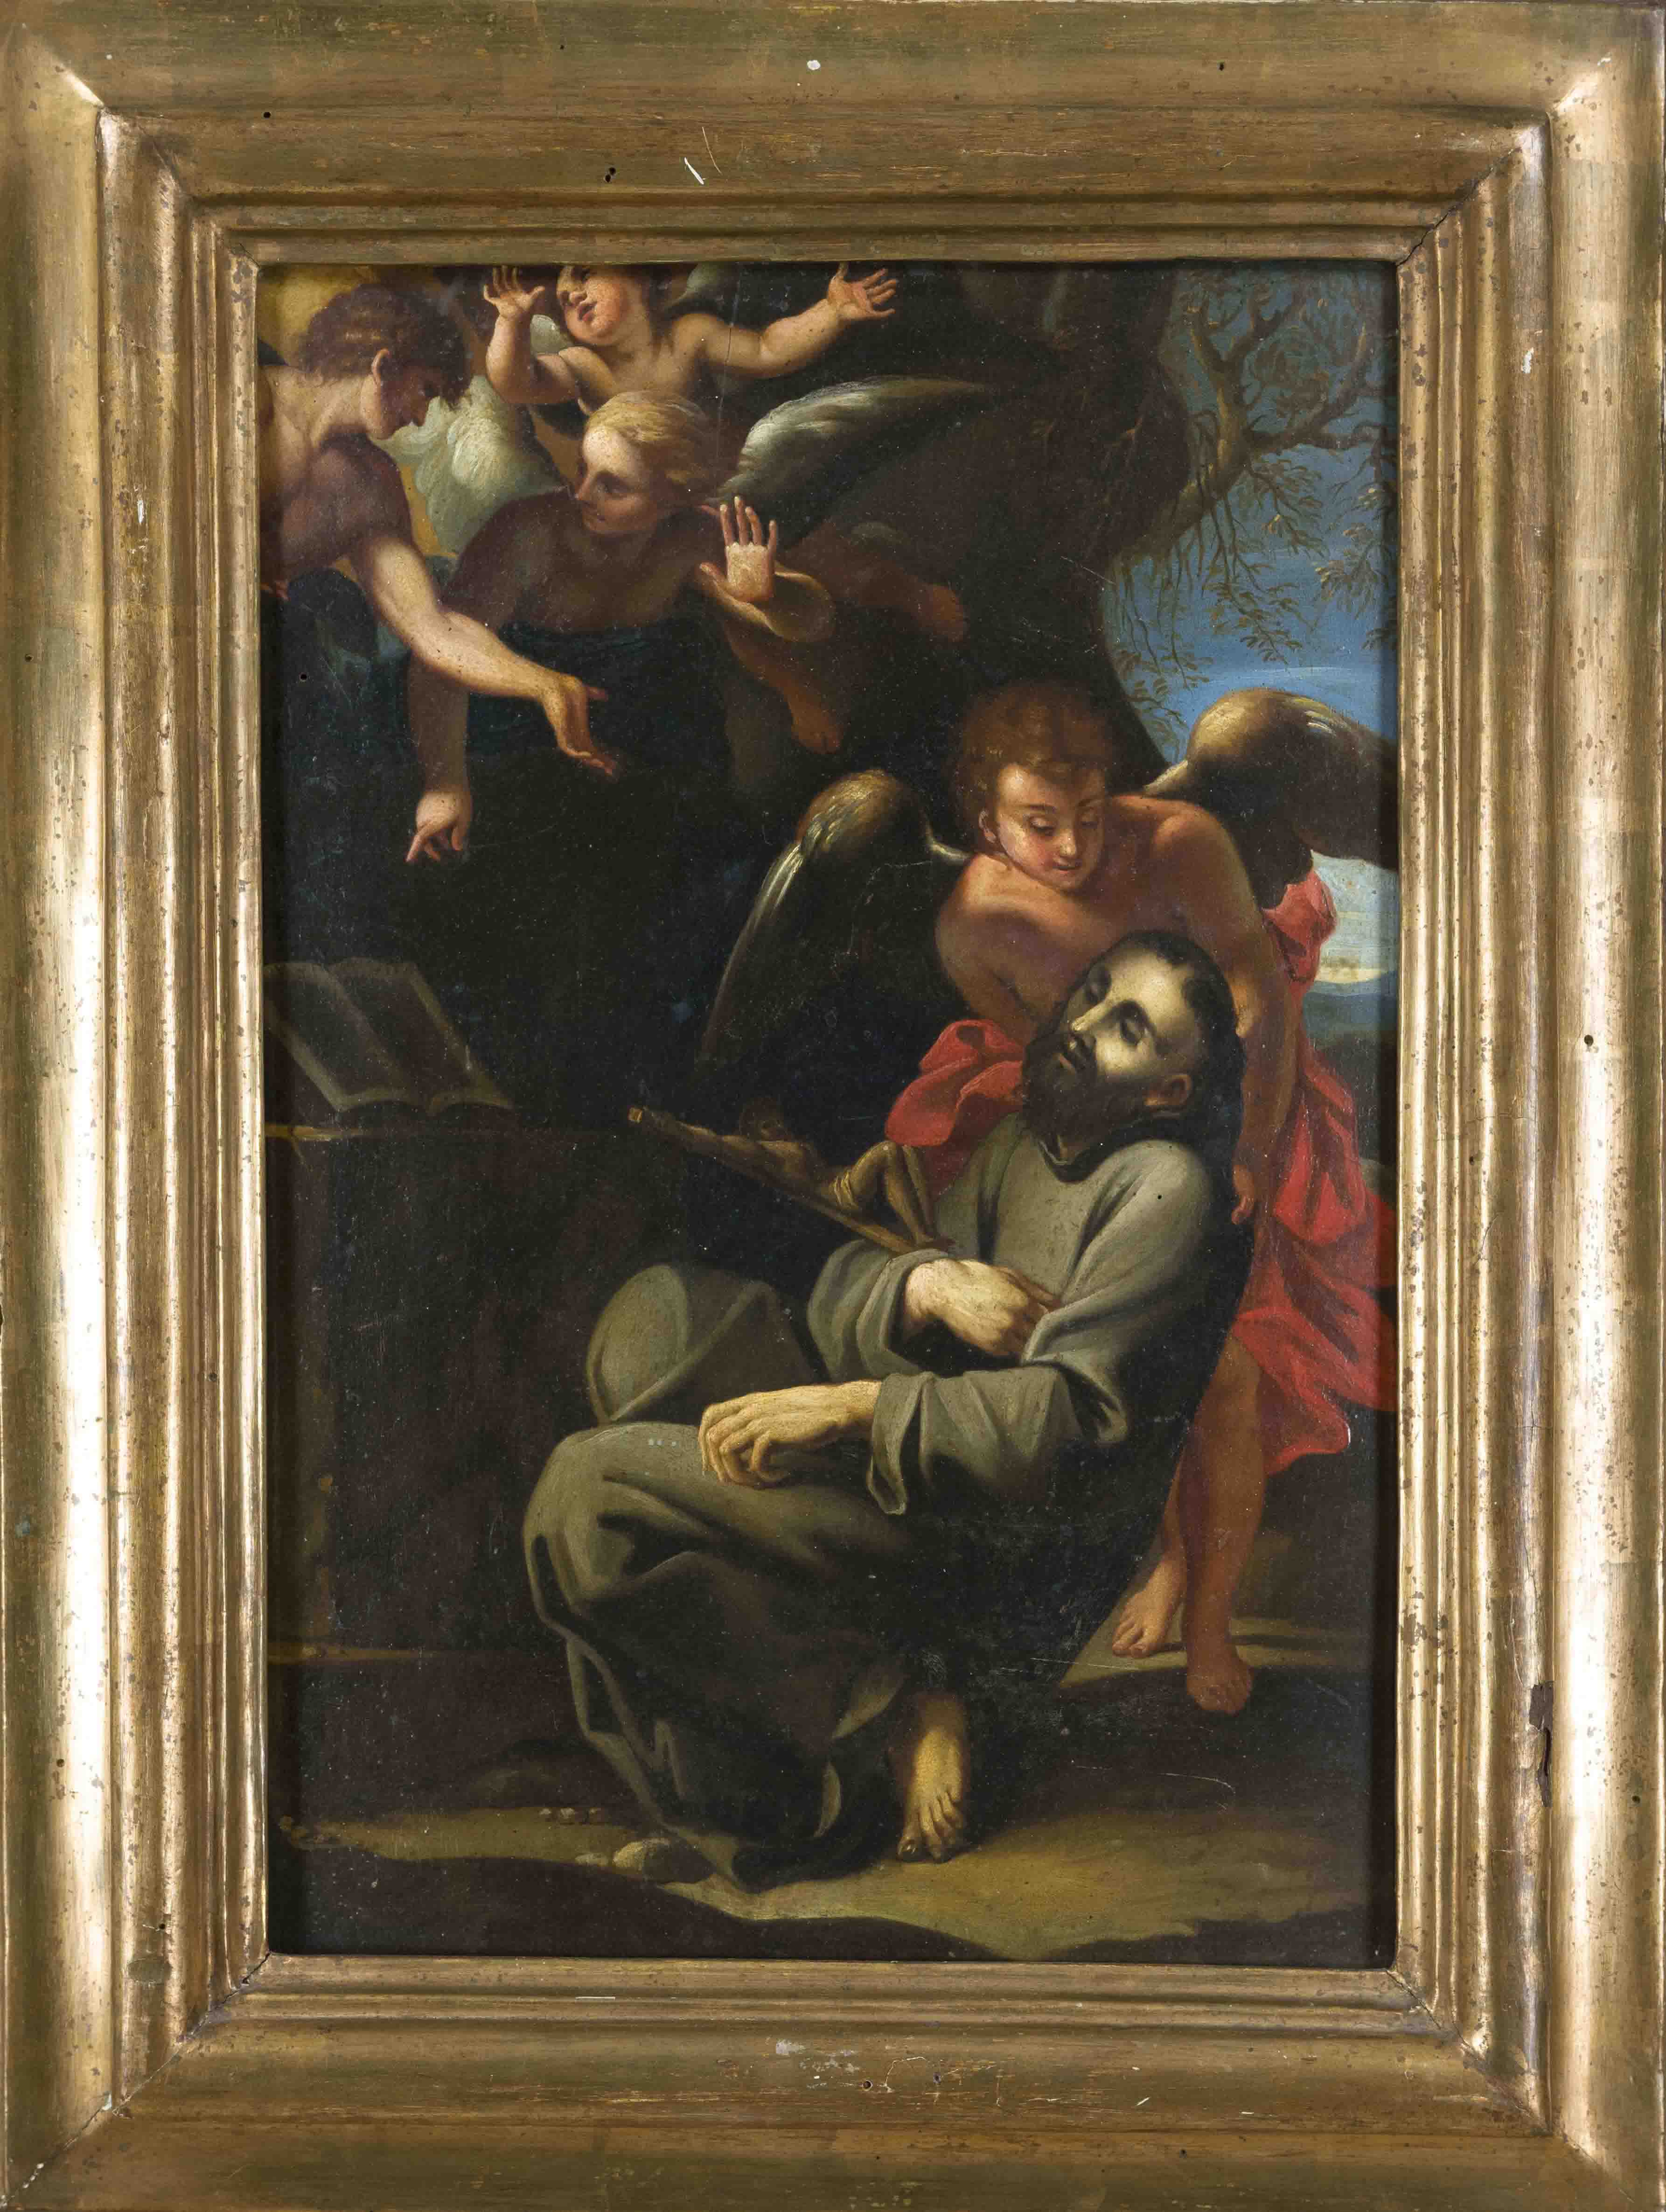 Anonymous 18th century painter, The Death of St. Francis, oil on panel, verso partly illegible